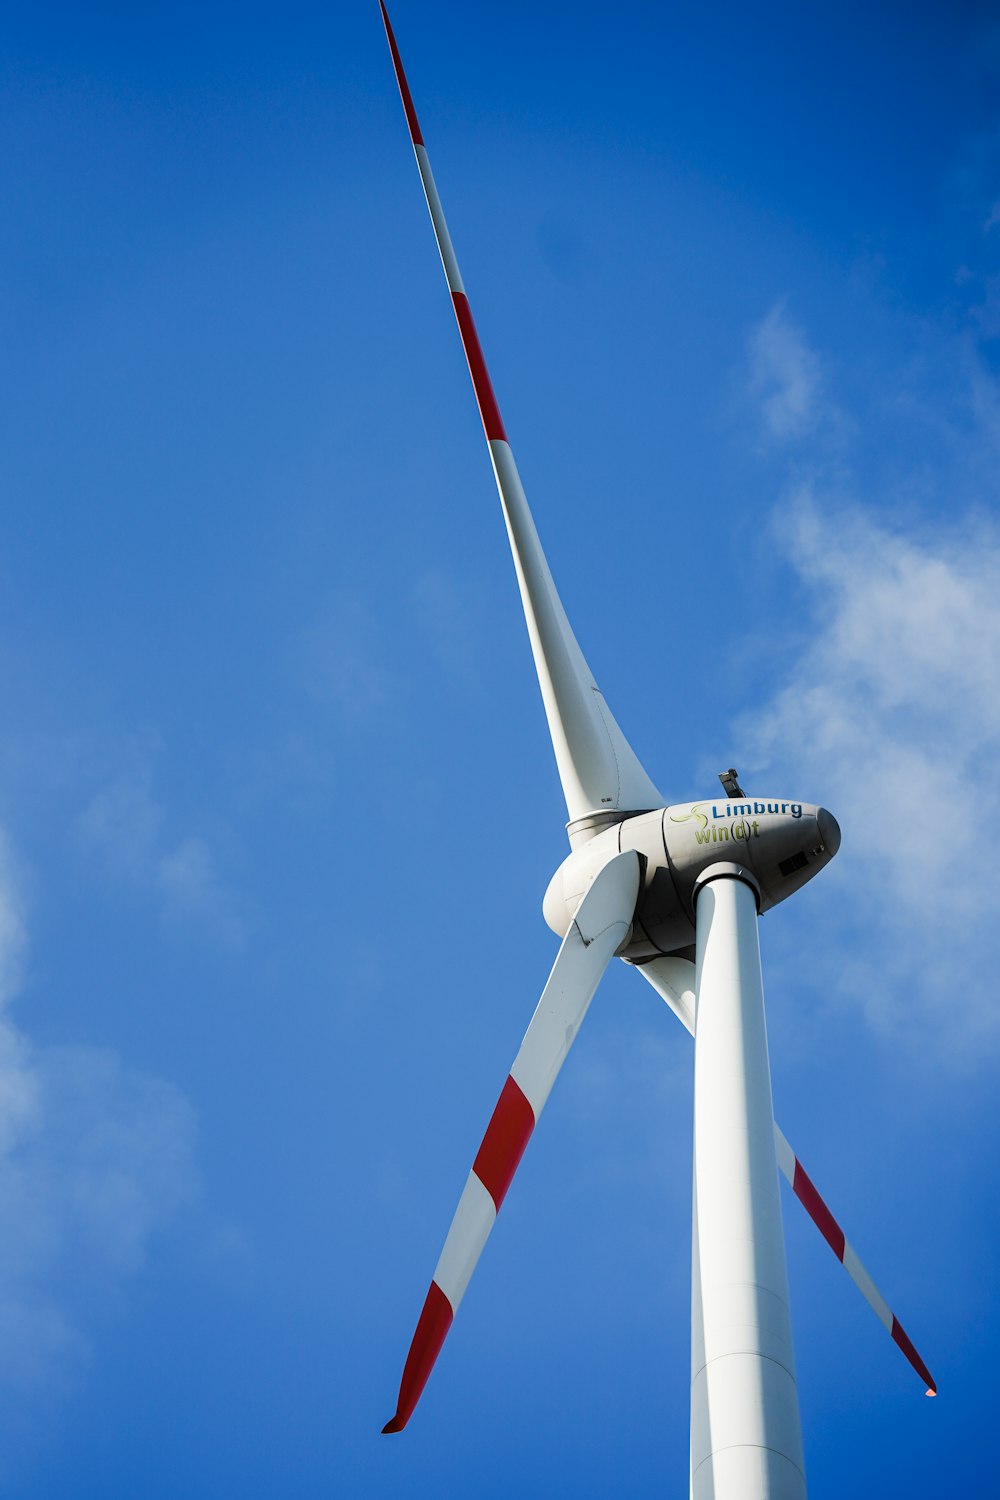 a wind turbine with red and white stripes on it